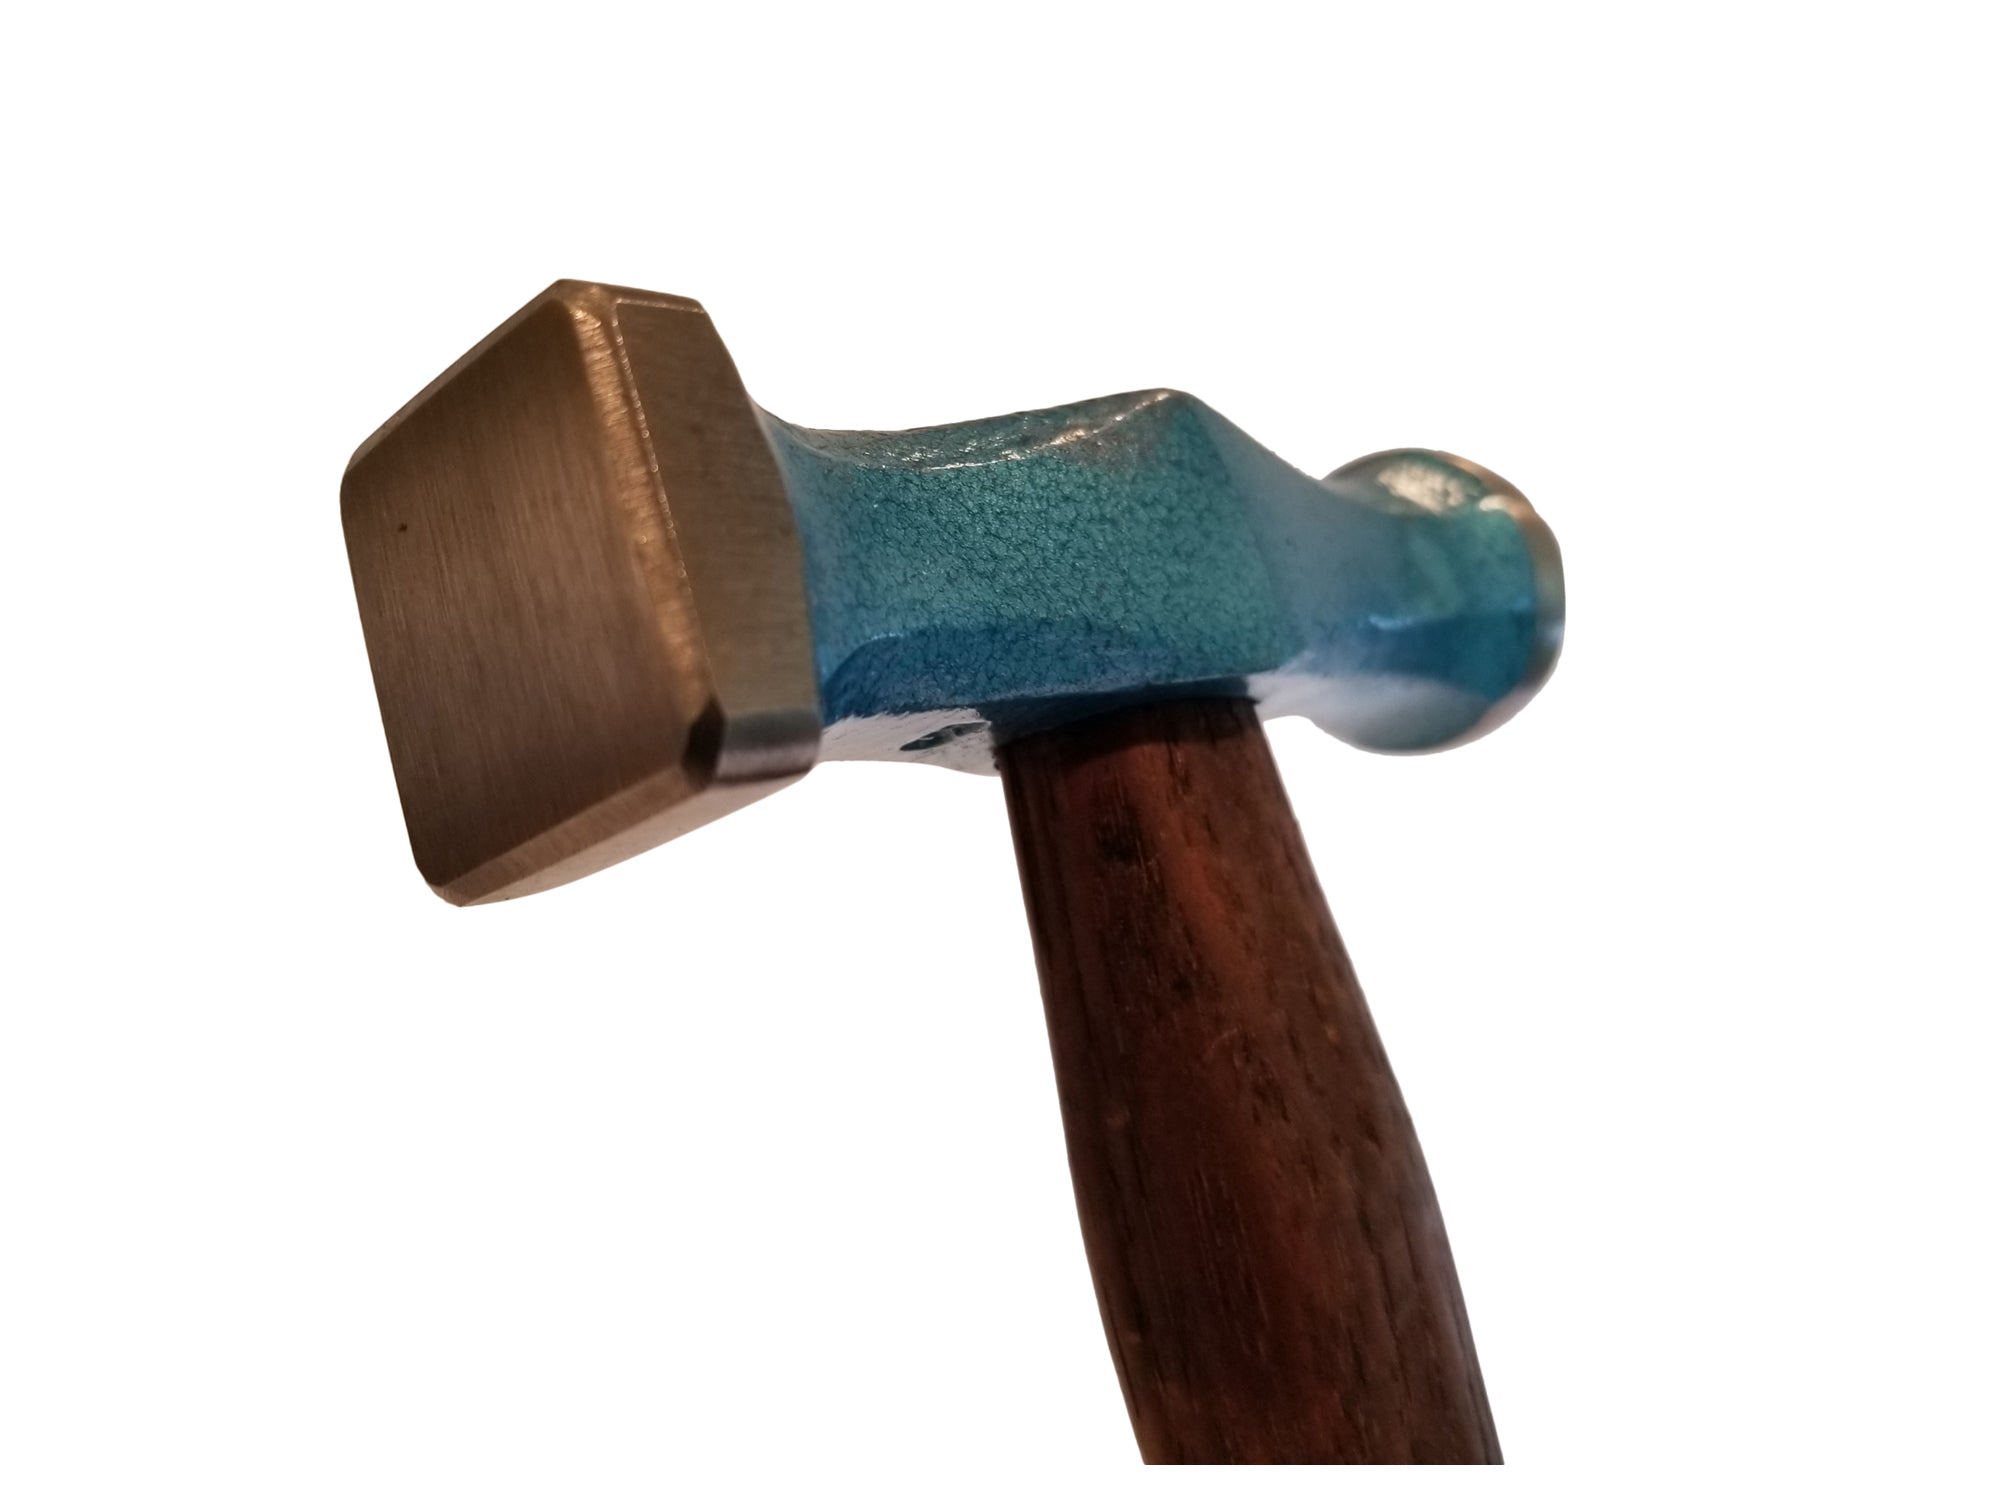 Picard 2510602 Lg. Planishing Double Bumping Hammer - Hanks Hammers